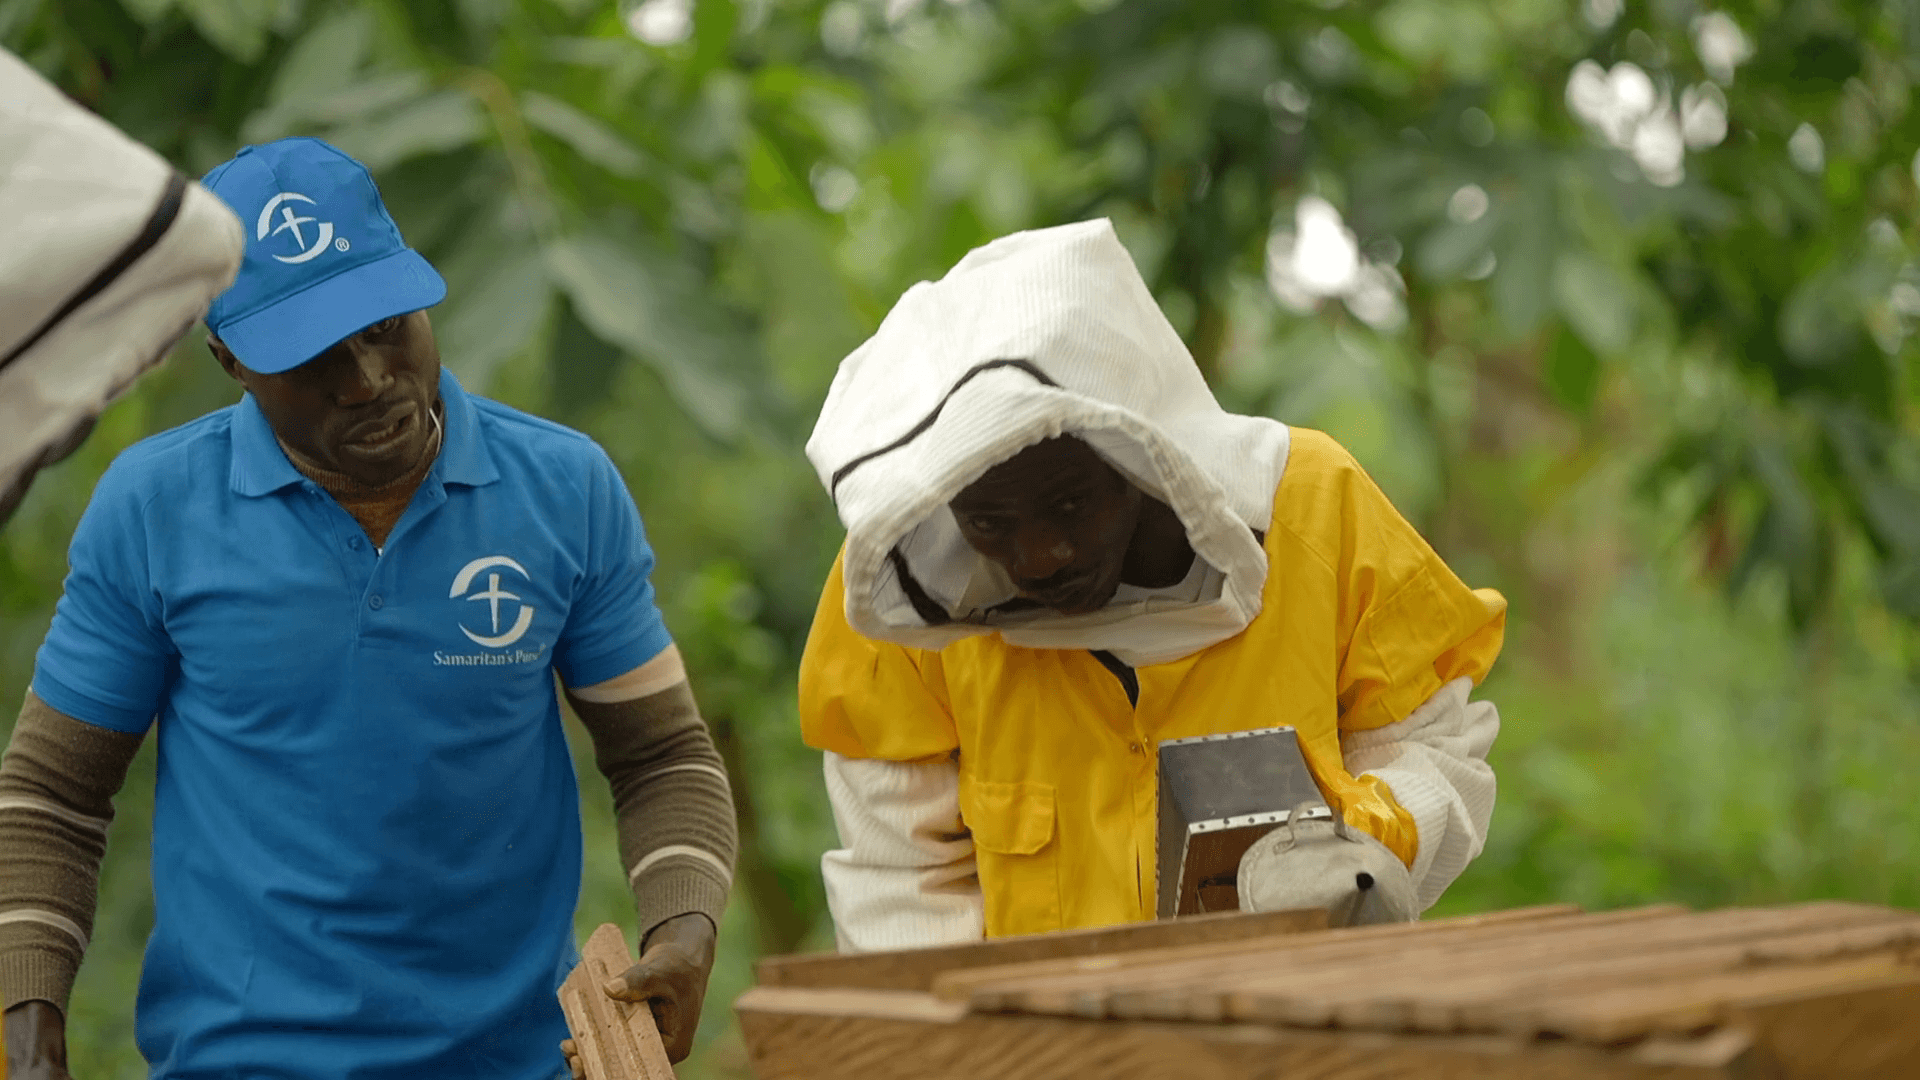 Dozens of Liberian beekeepers are learning the trade through the Beekeeping for Economic Empowerment (BEE) program.